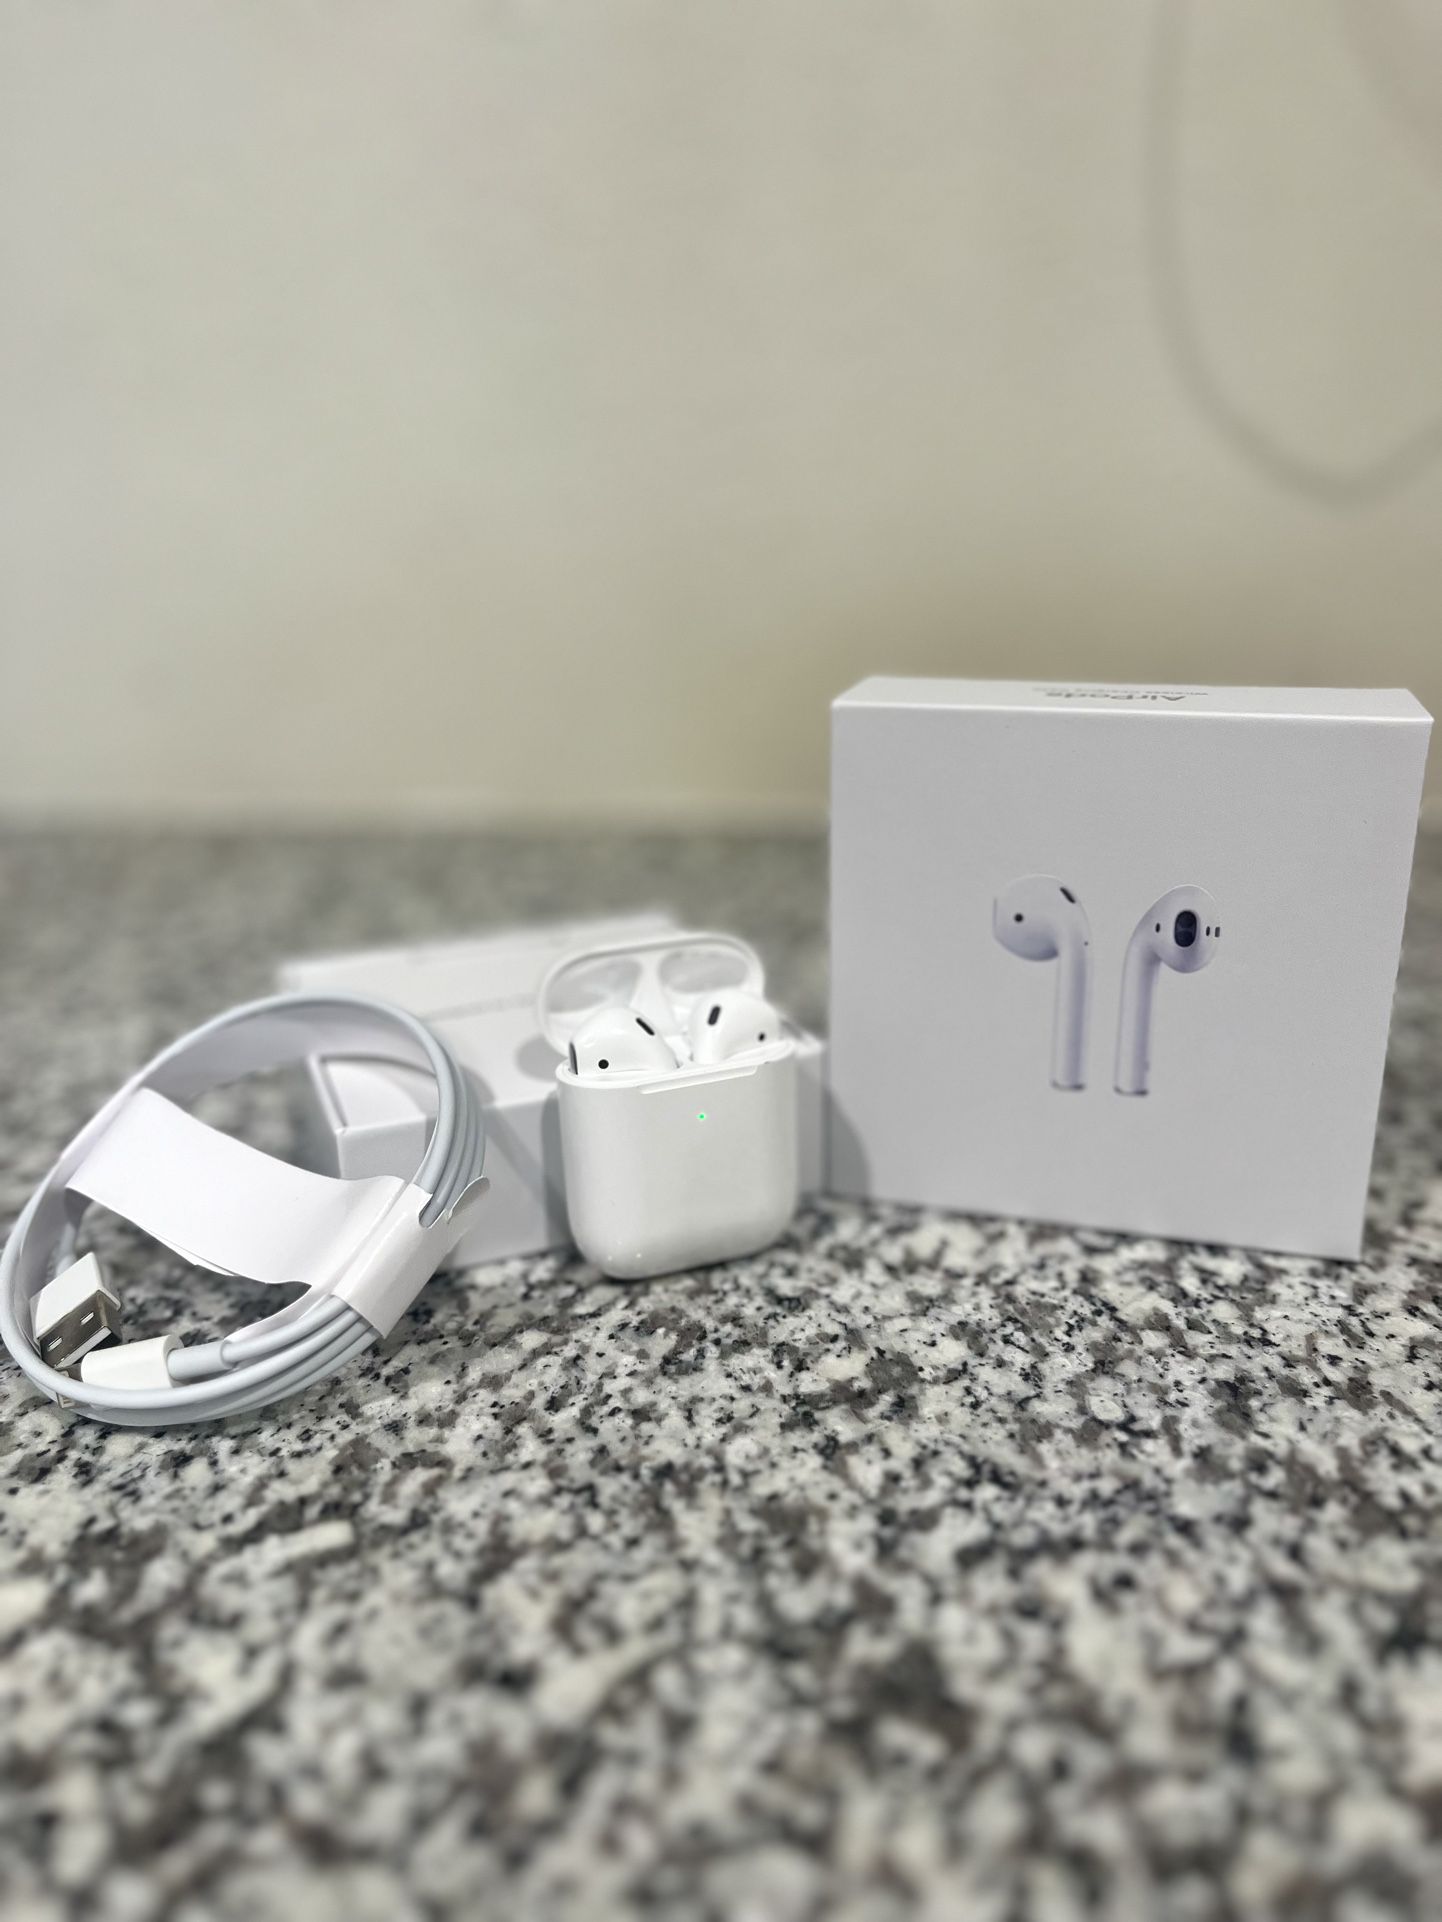 New Apple AirPods 2nd Gen Bluetooth Earbuds Headsets Earphone + Charging Case